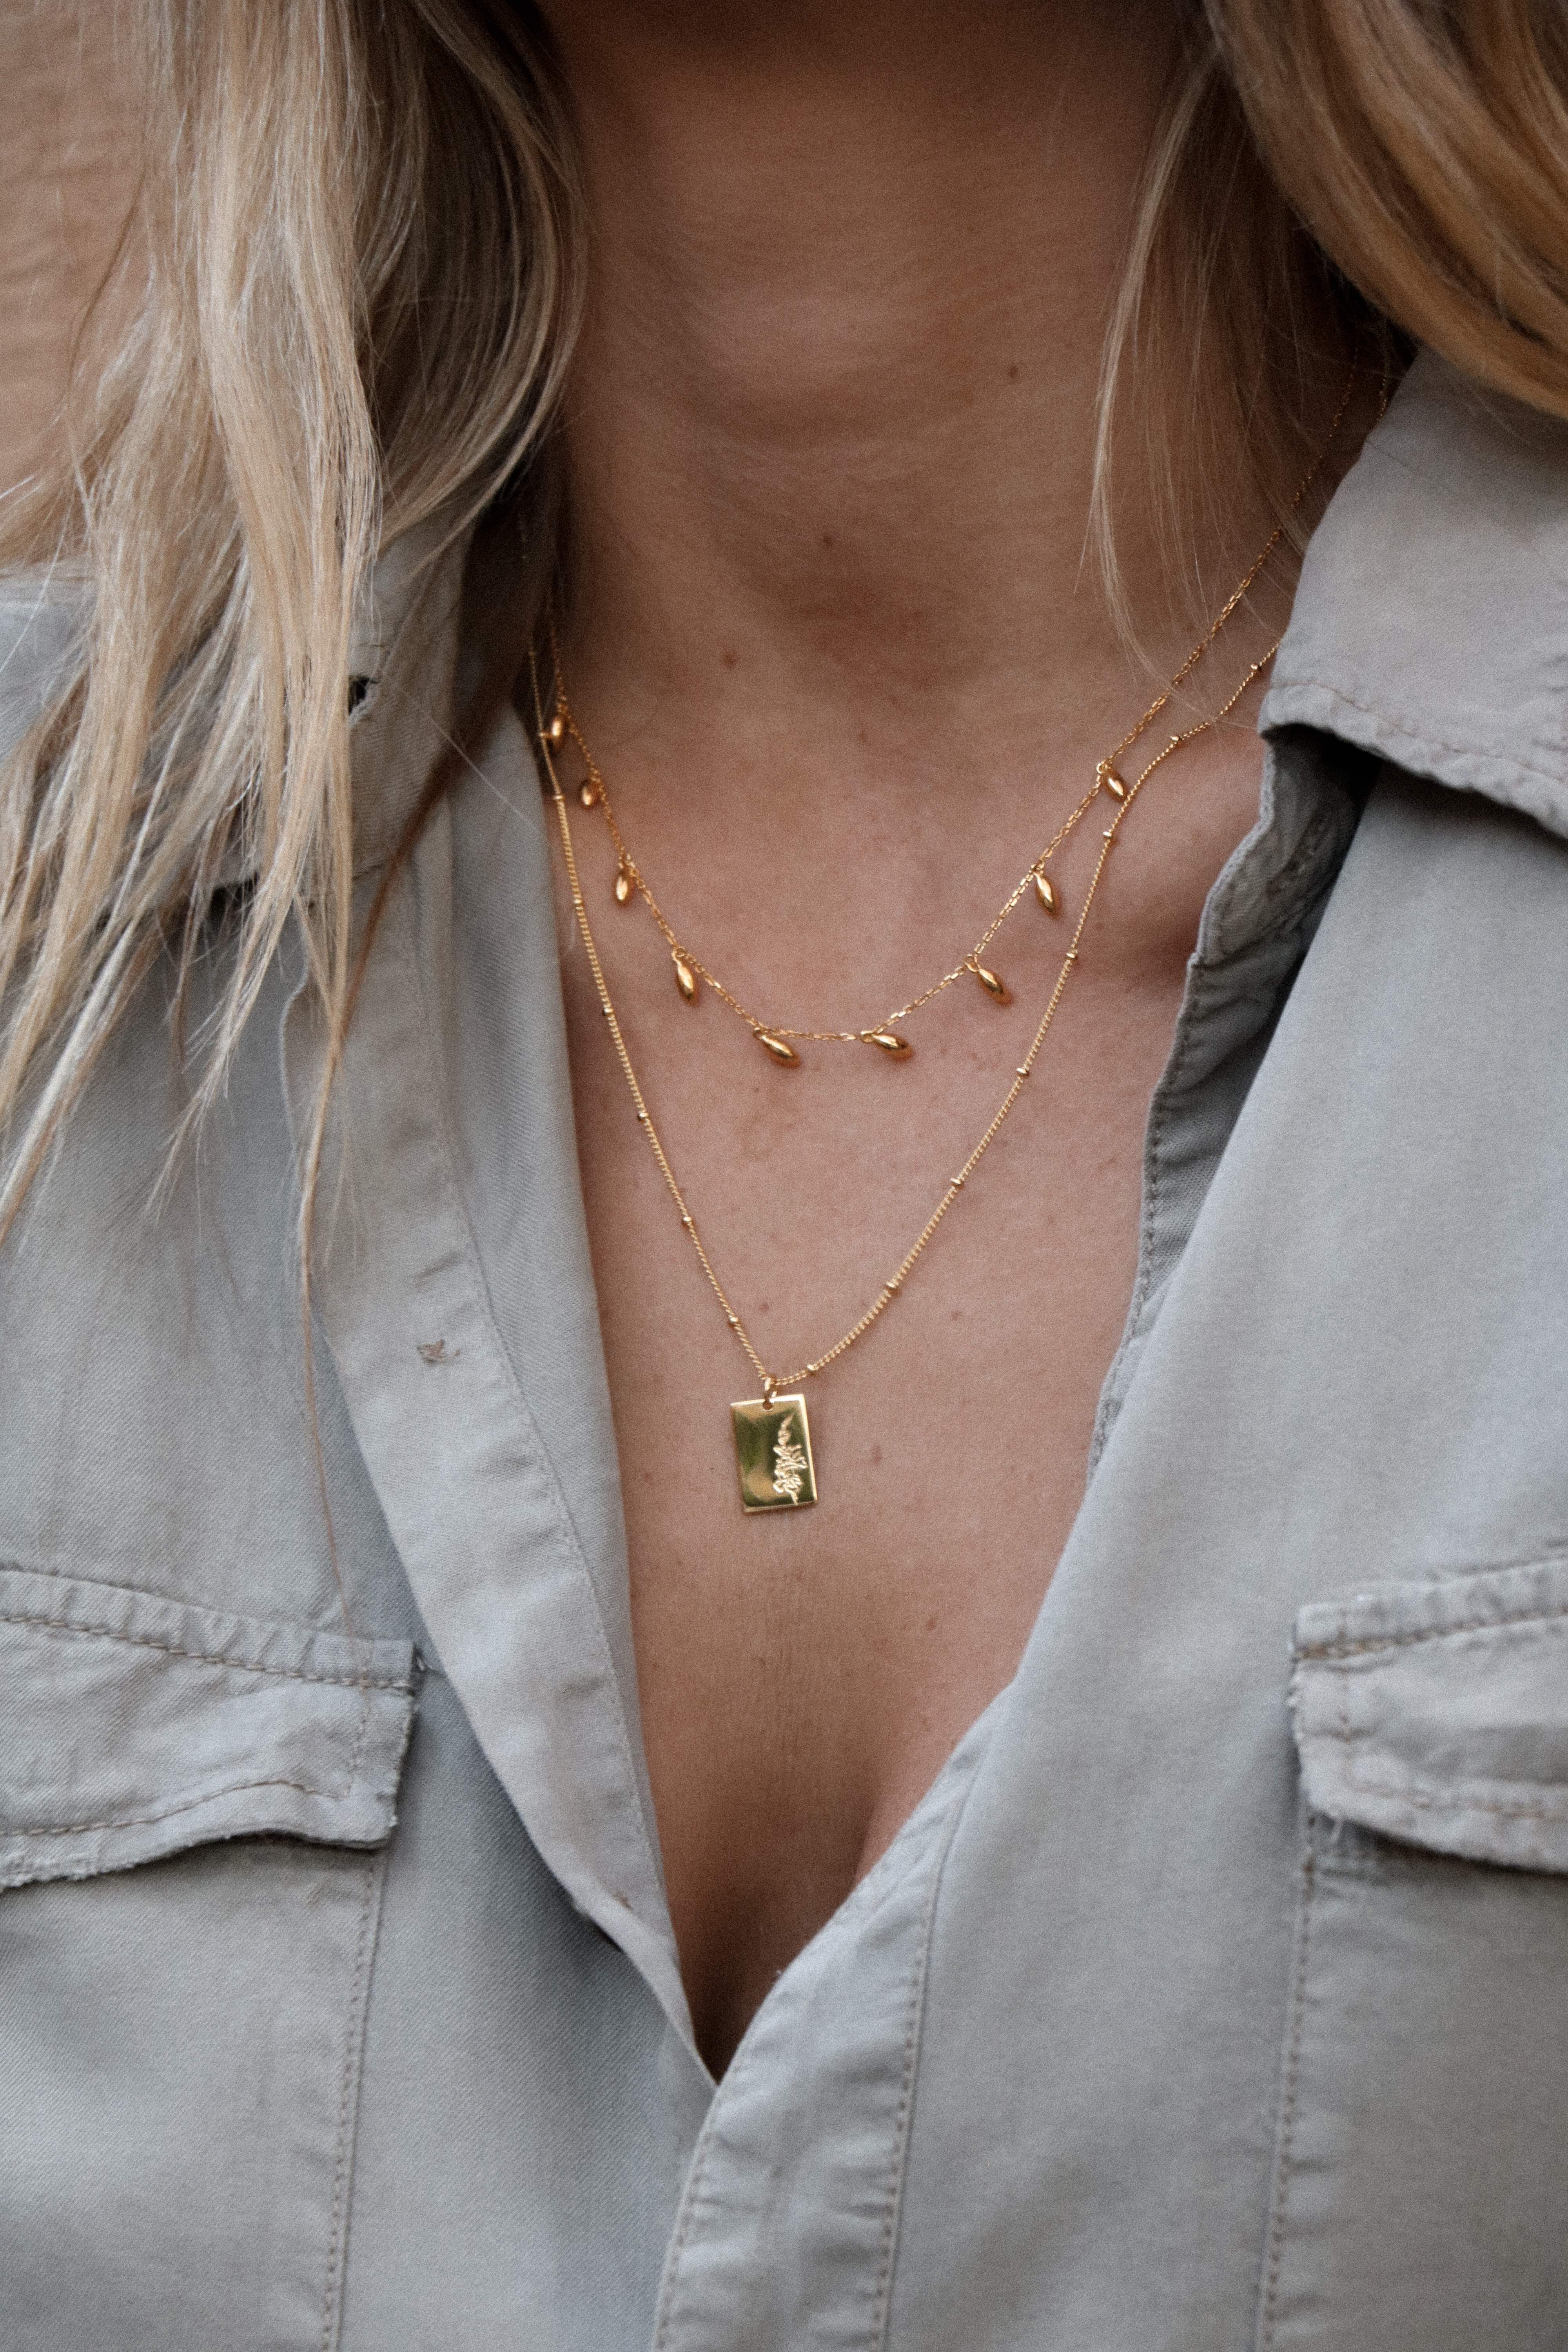 Aussie Jewellery Label Bianko Releases a Collection of Delicate ...